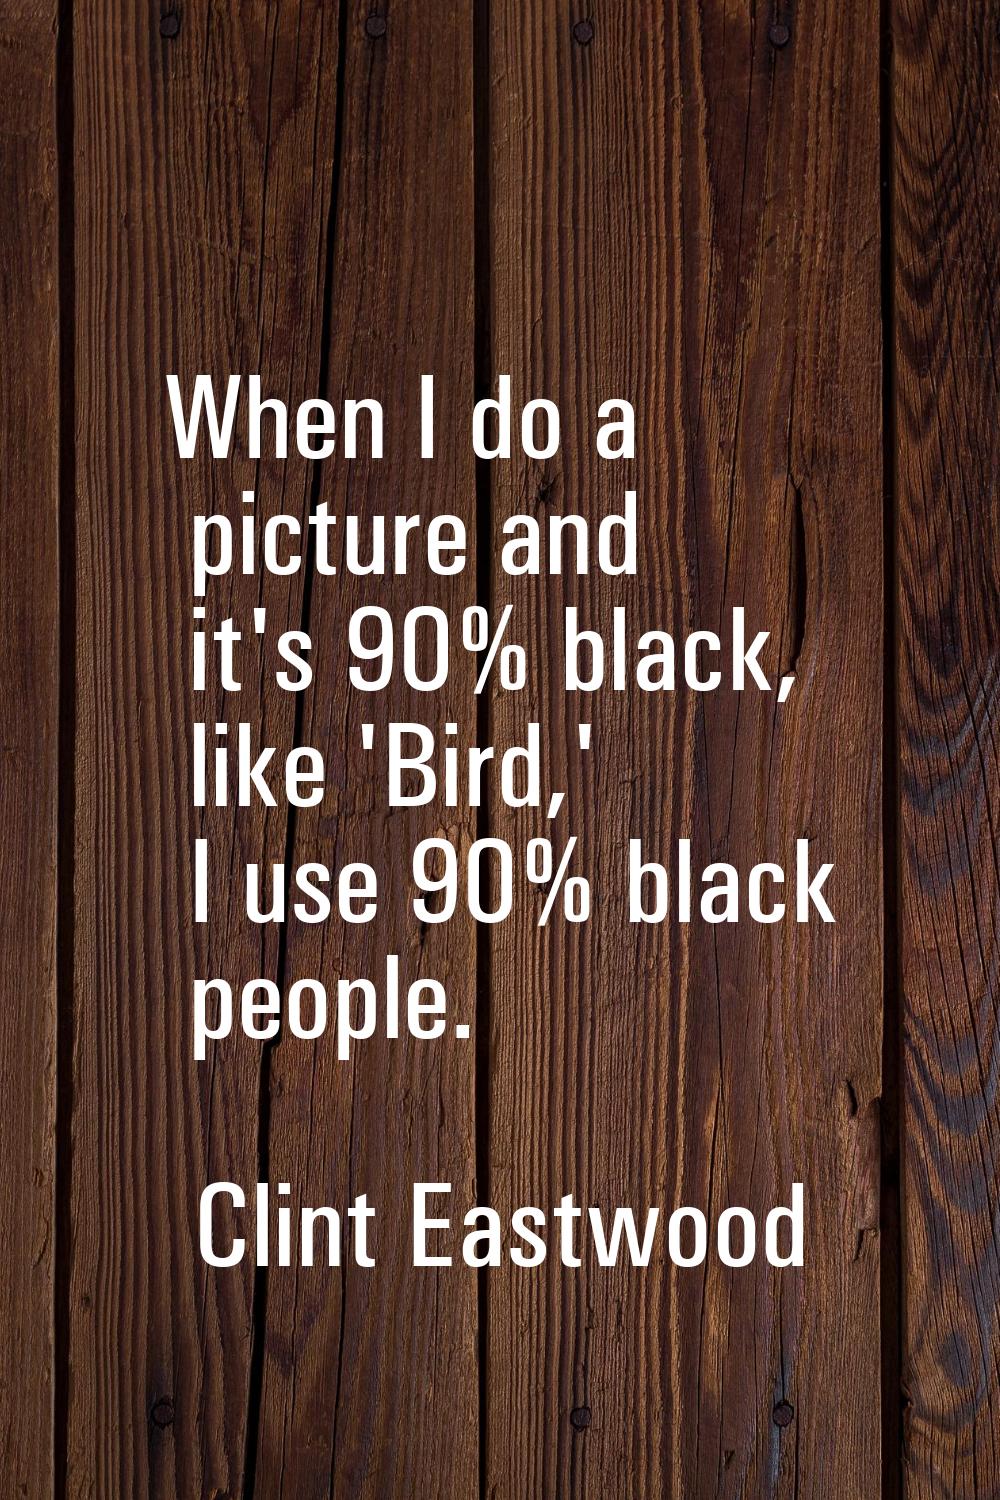 When I do a picture and it's 90% black, like 'Bird,' I use 90% black people.